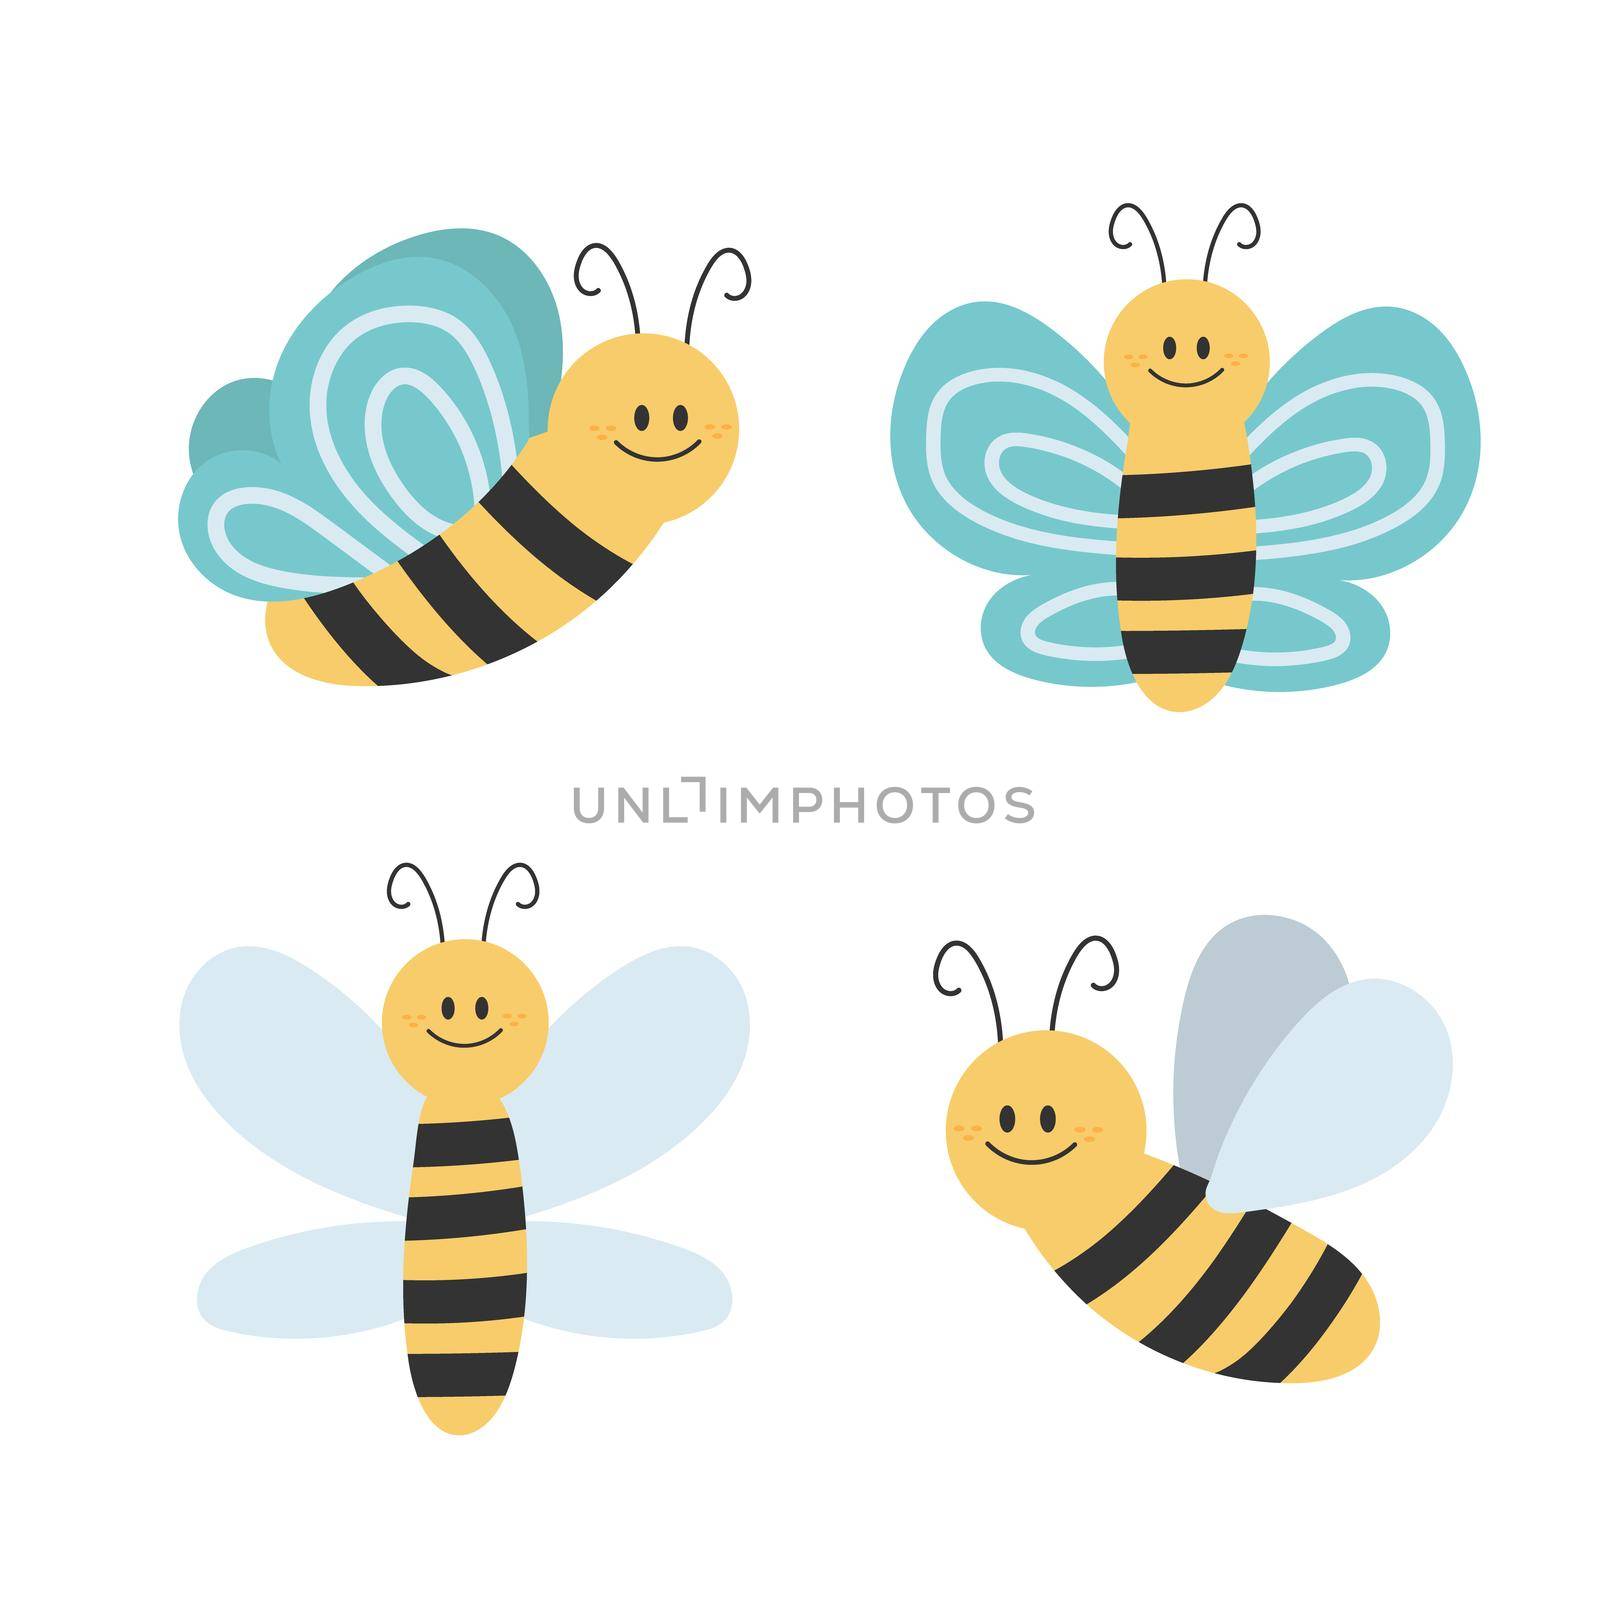 Lovely simple design of a cartoon yellow and black bees on a white background. Hand drawn style set